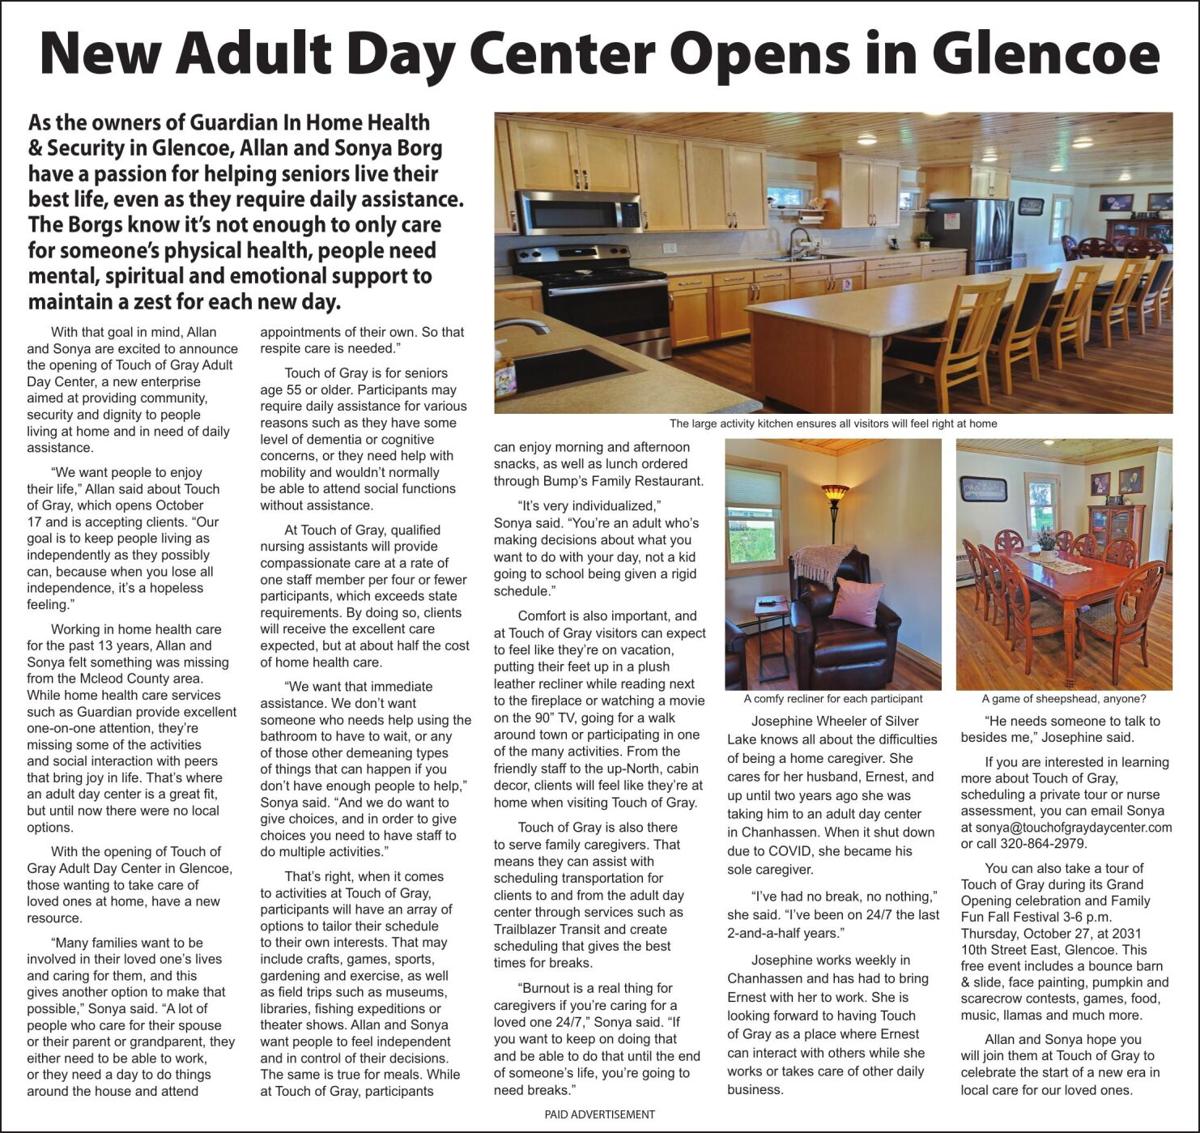 New Adult Day Center Opens in Glencoe